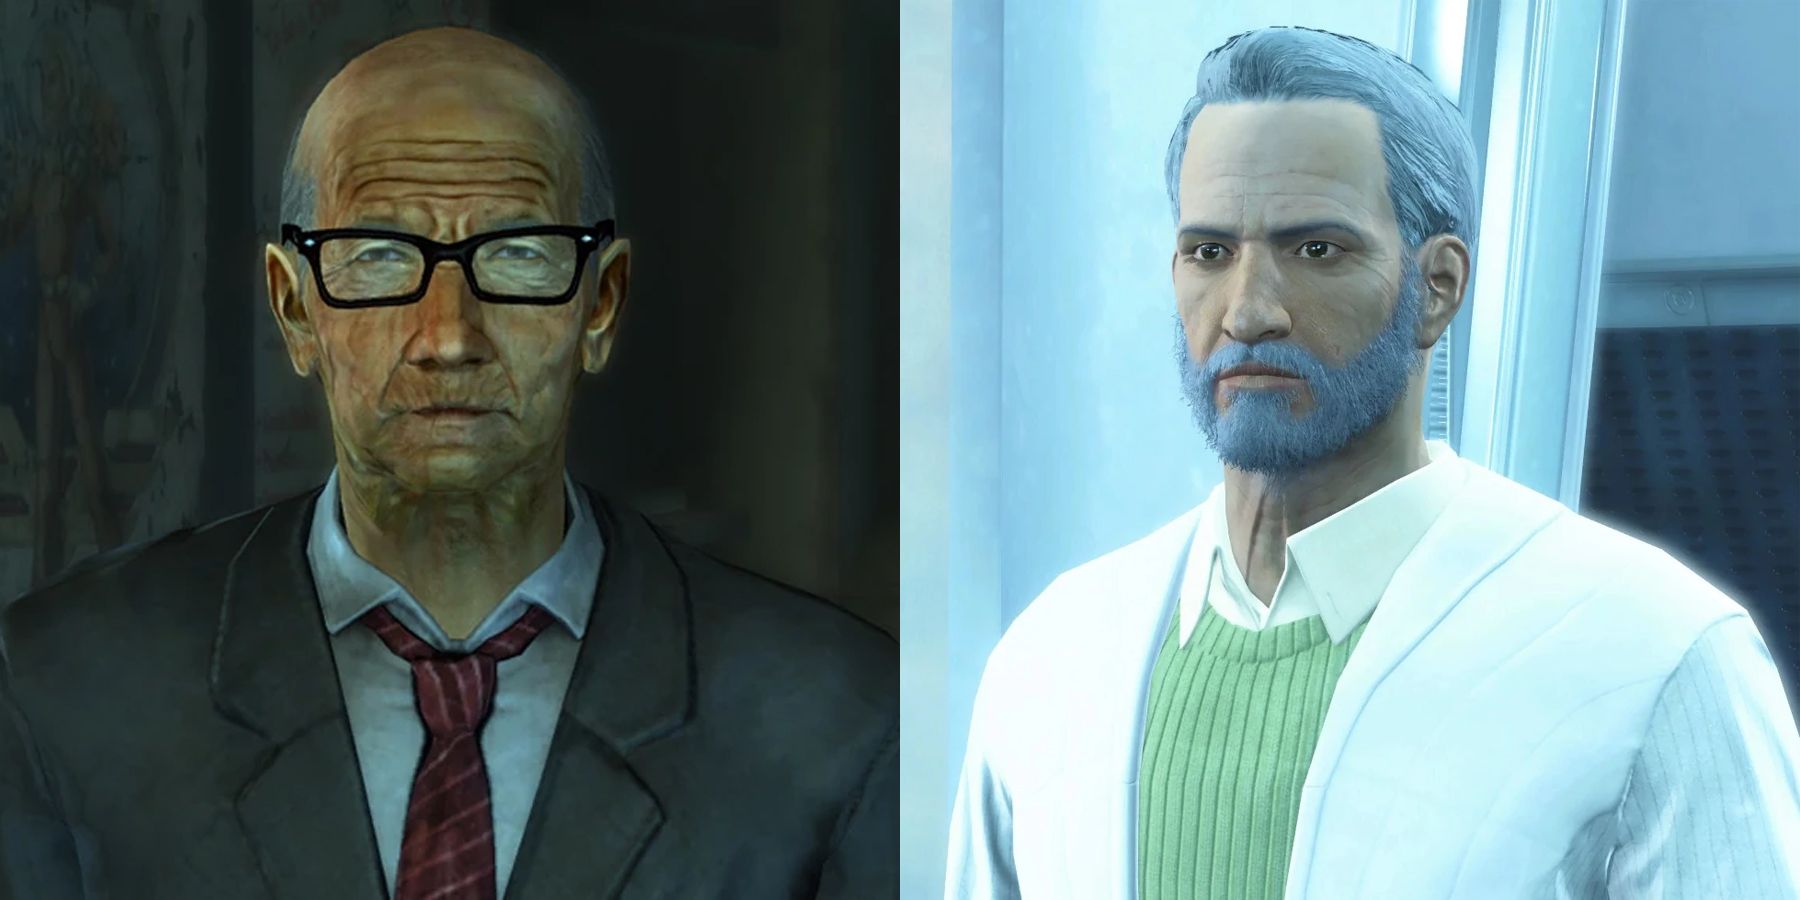 Fallout 3's Institute Member Dr. Zimmer Fallout 4 Father